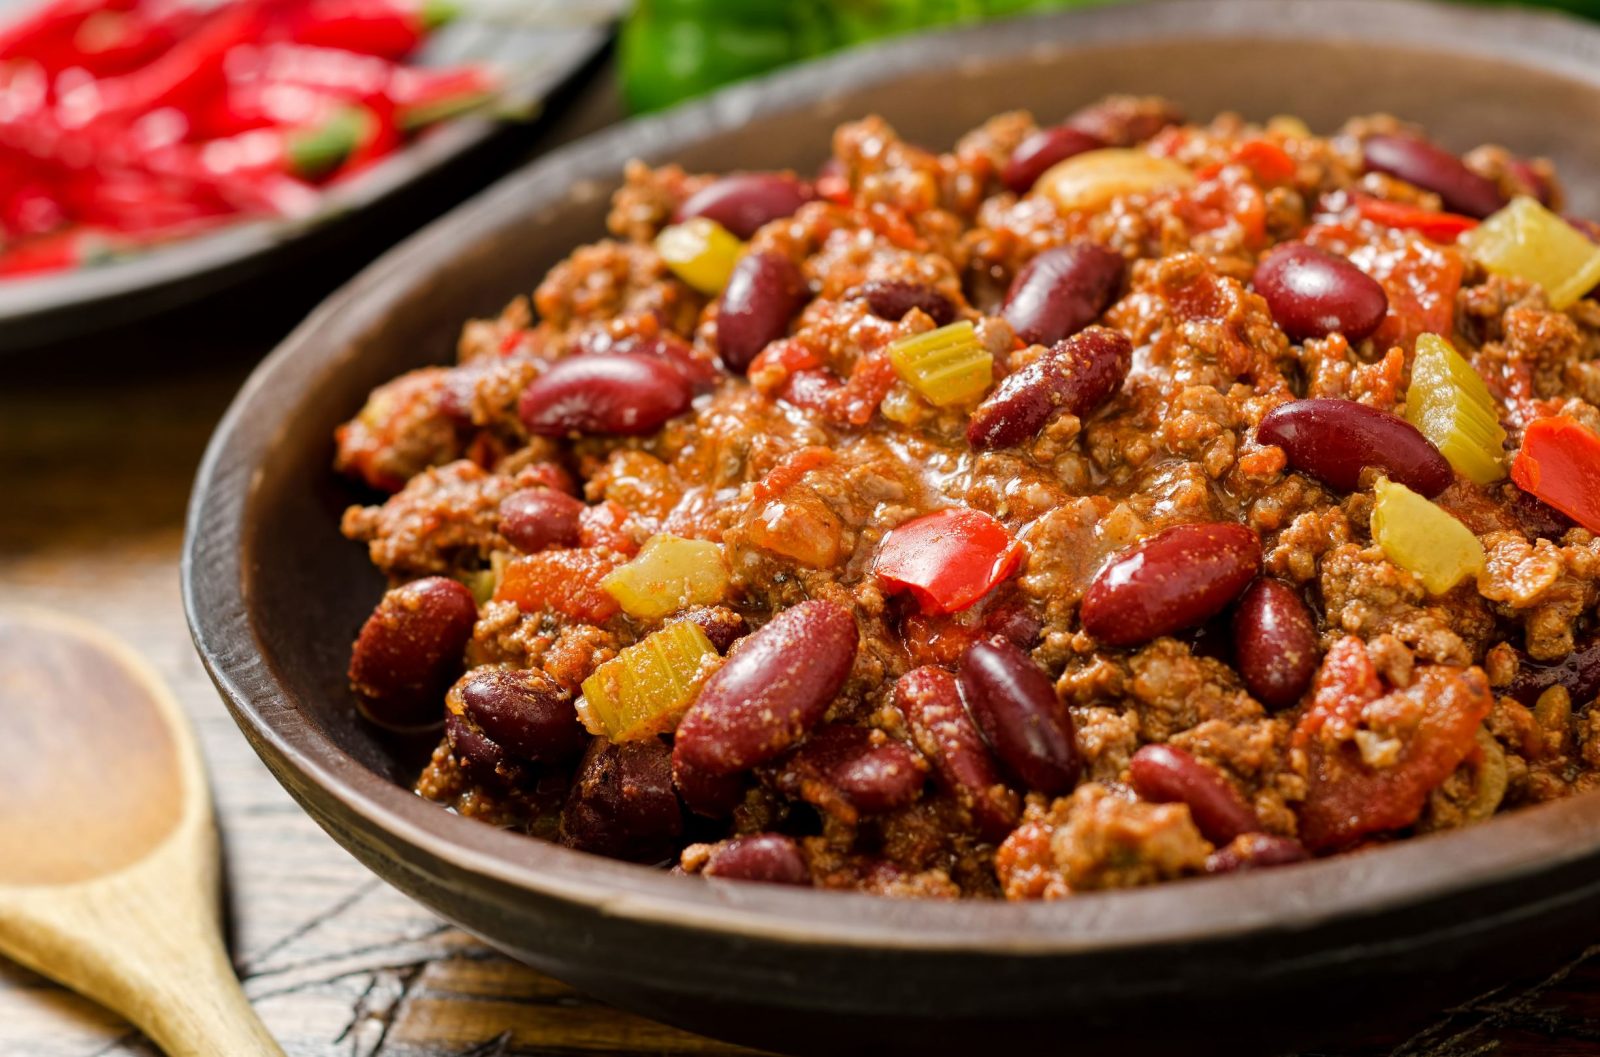 🌶 Only a Person Who Can Handle the Heat Will Have Eaten 13/25 of These Spicy Foods Chilli Con Carne